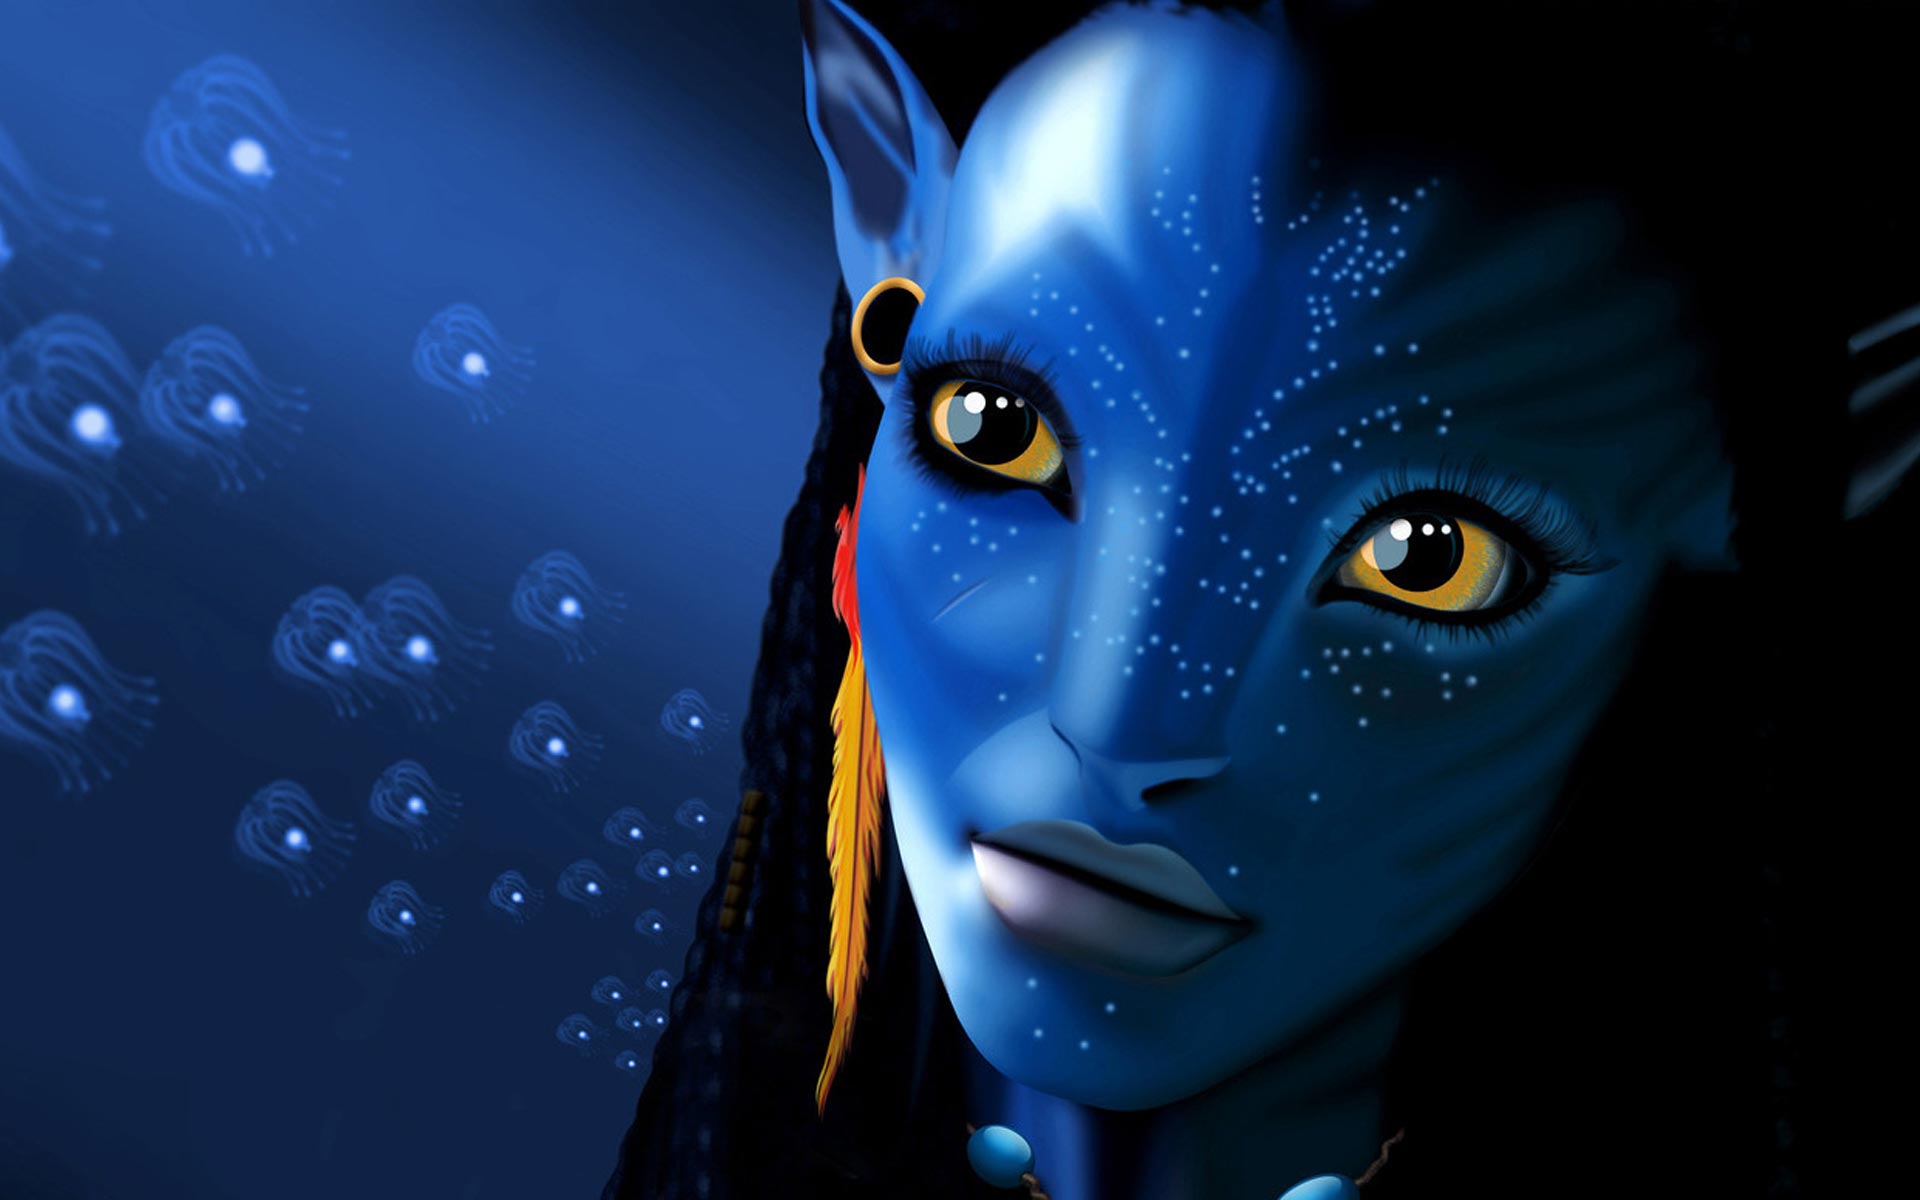 Avatar Game Hd Wallpapers in Games Imagescicom